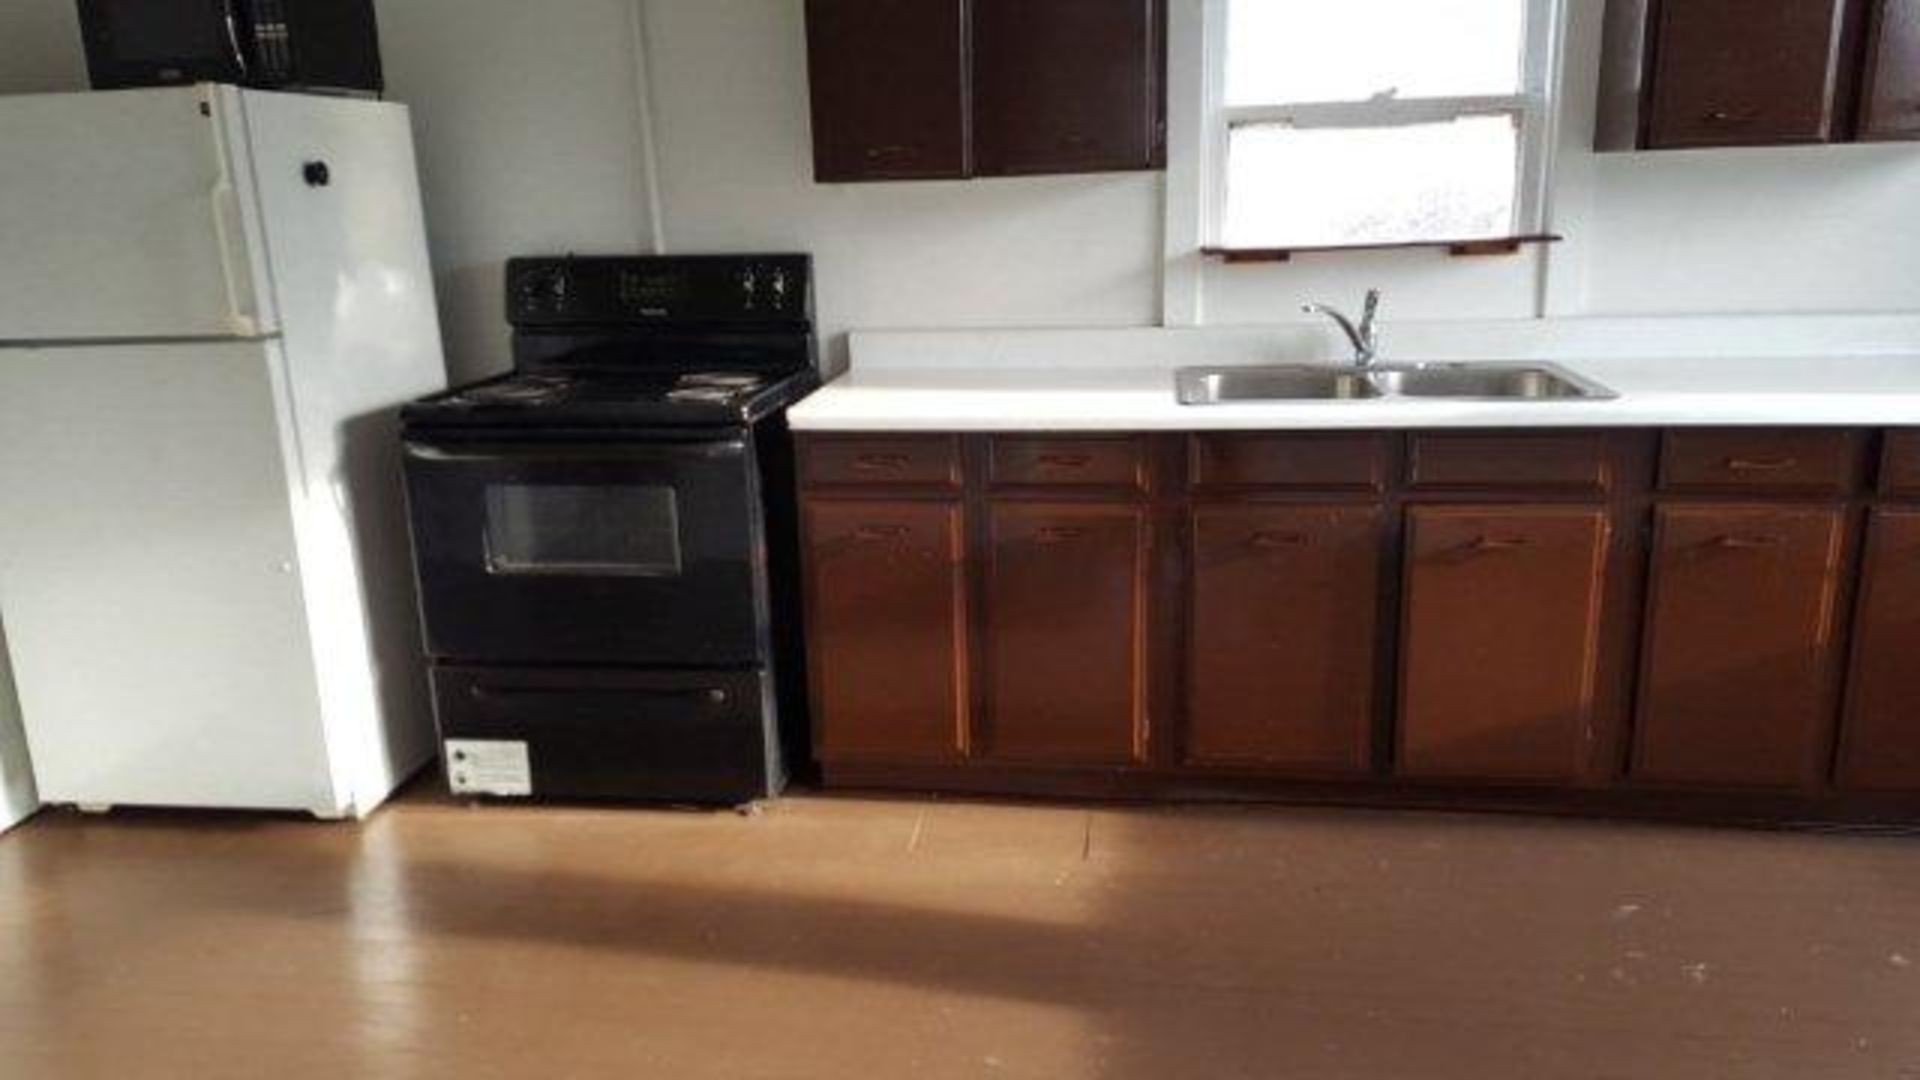 BULK BID: The Real Estate & Restaurant Equipment/Fixtures as a Whole. Lots 1 & 2. - Image 28 of 32